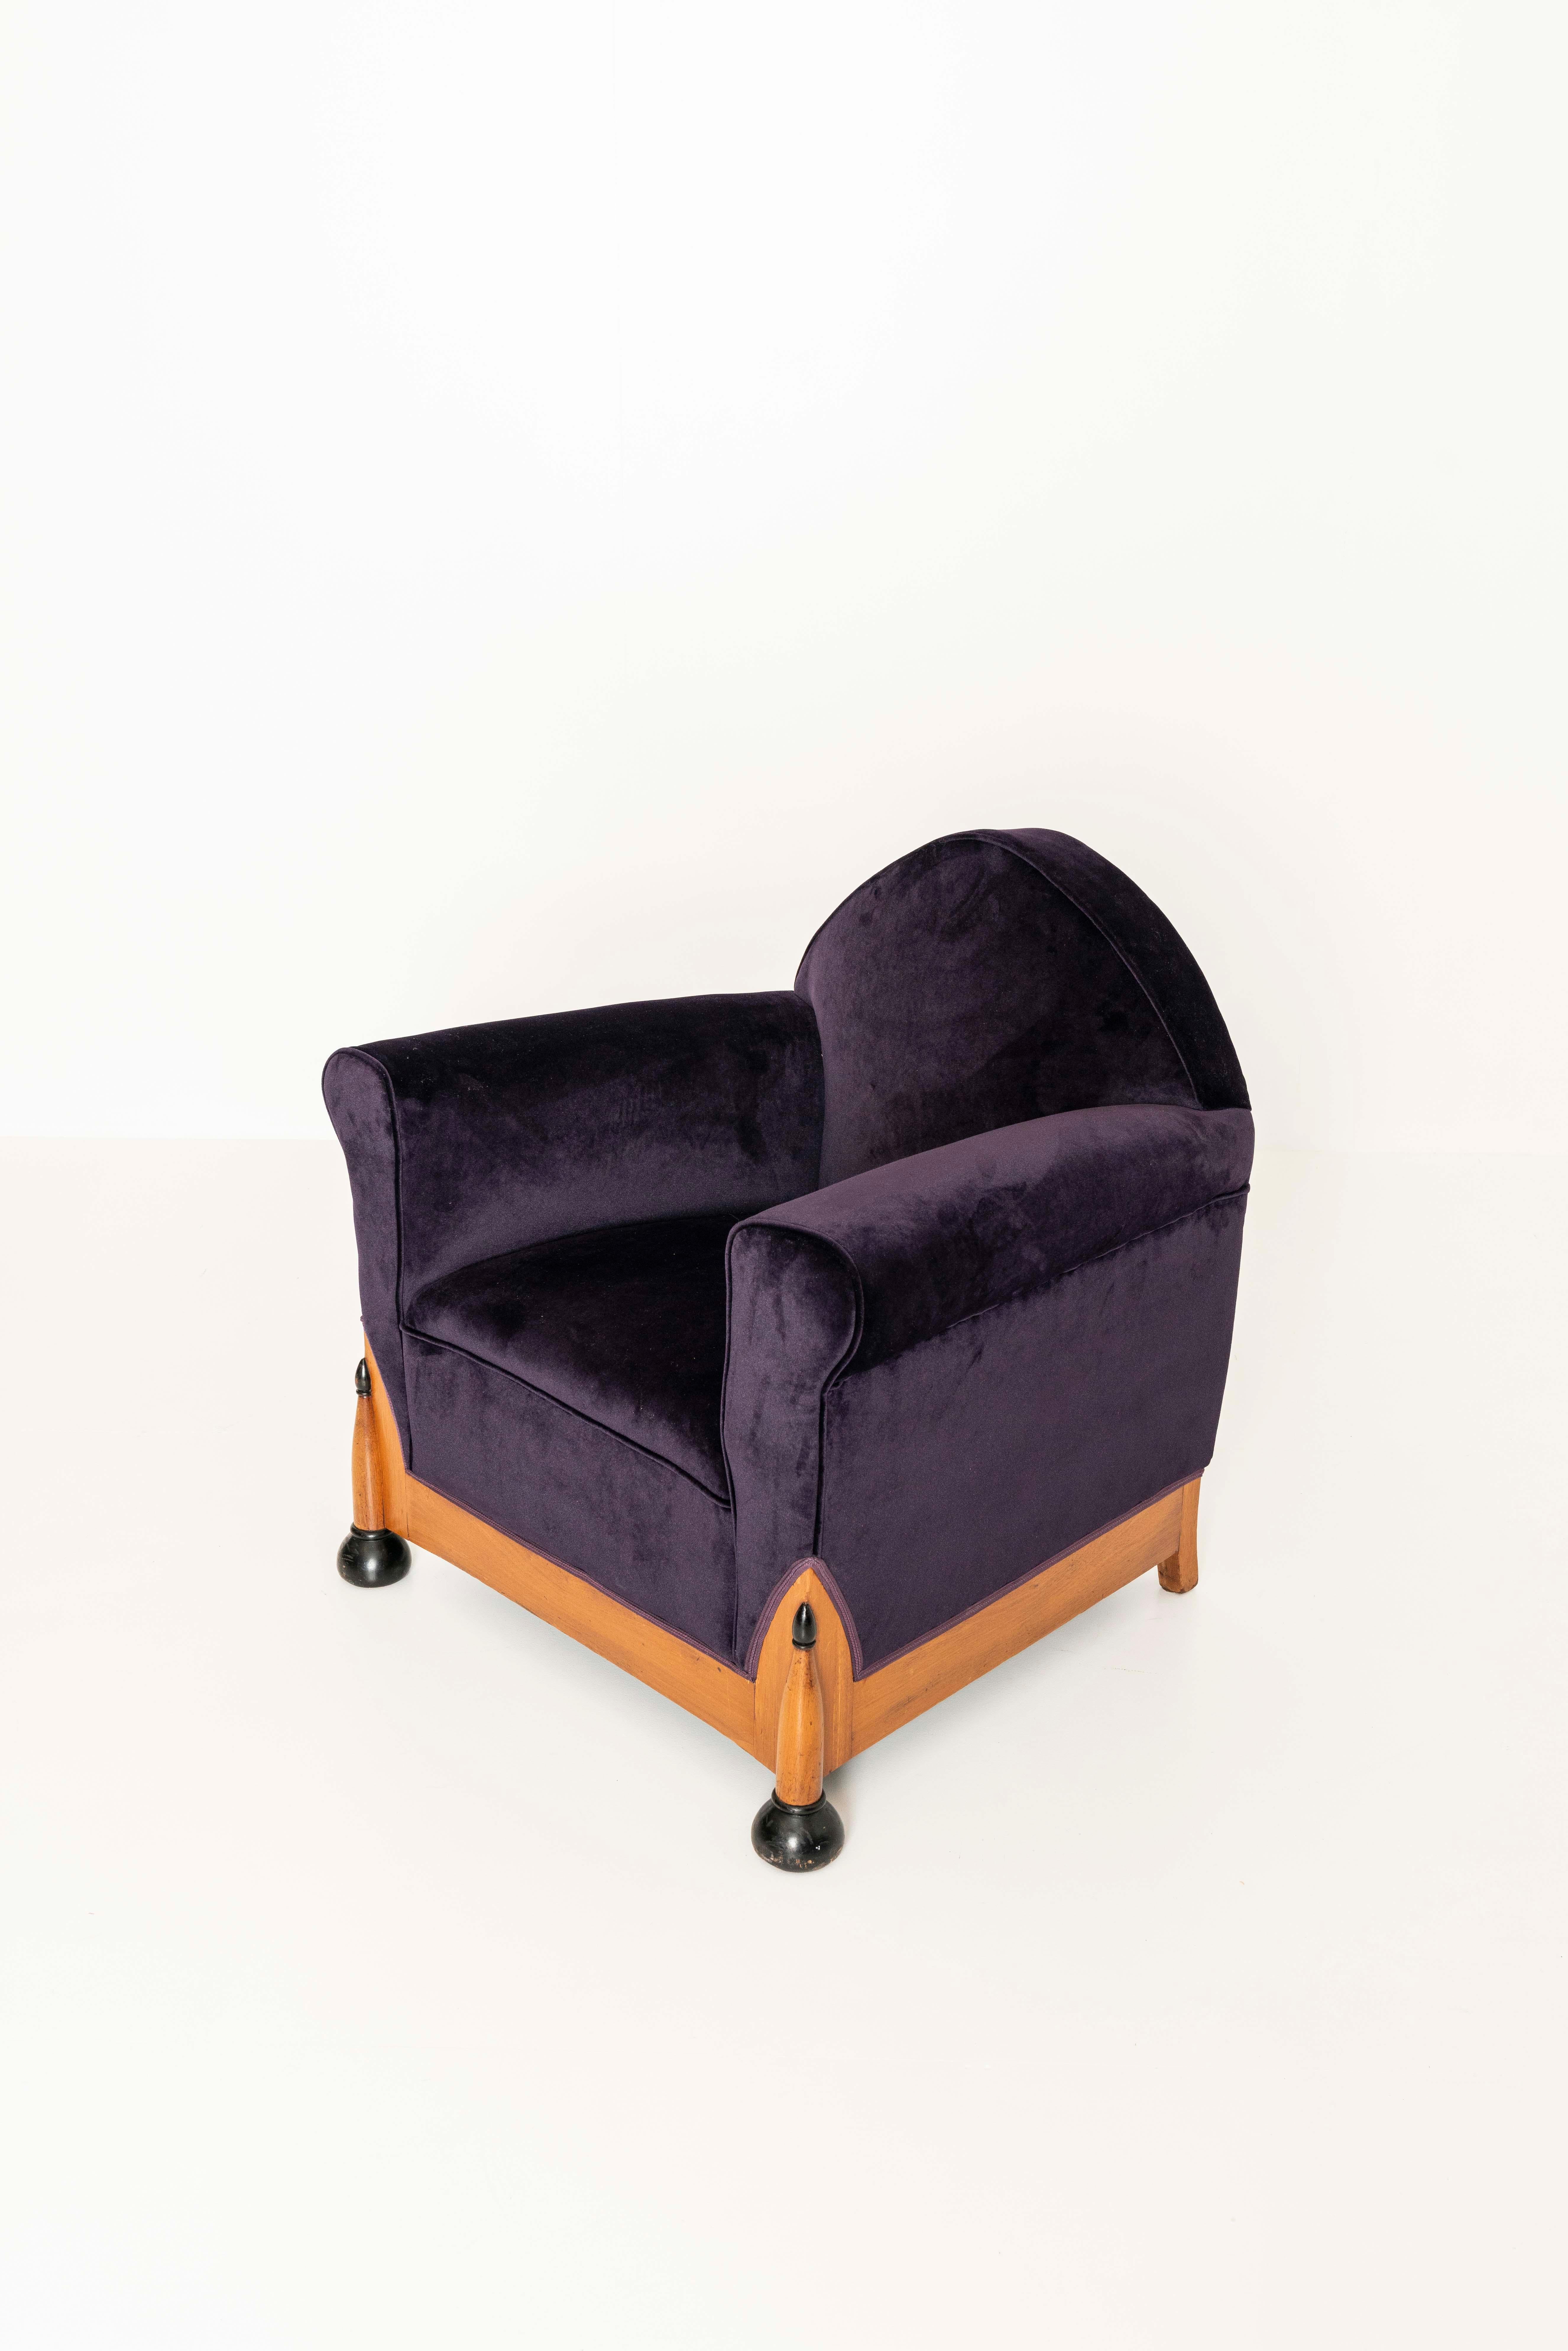 Mid-20th Century Two Amsterdam School Lounge Chairs in Purple Velvet, The Netherlands 1930s